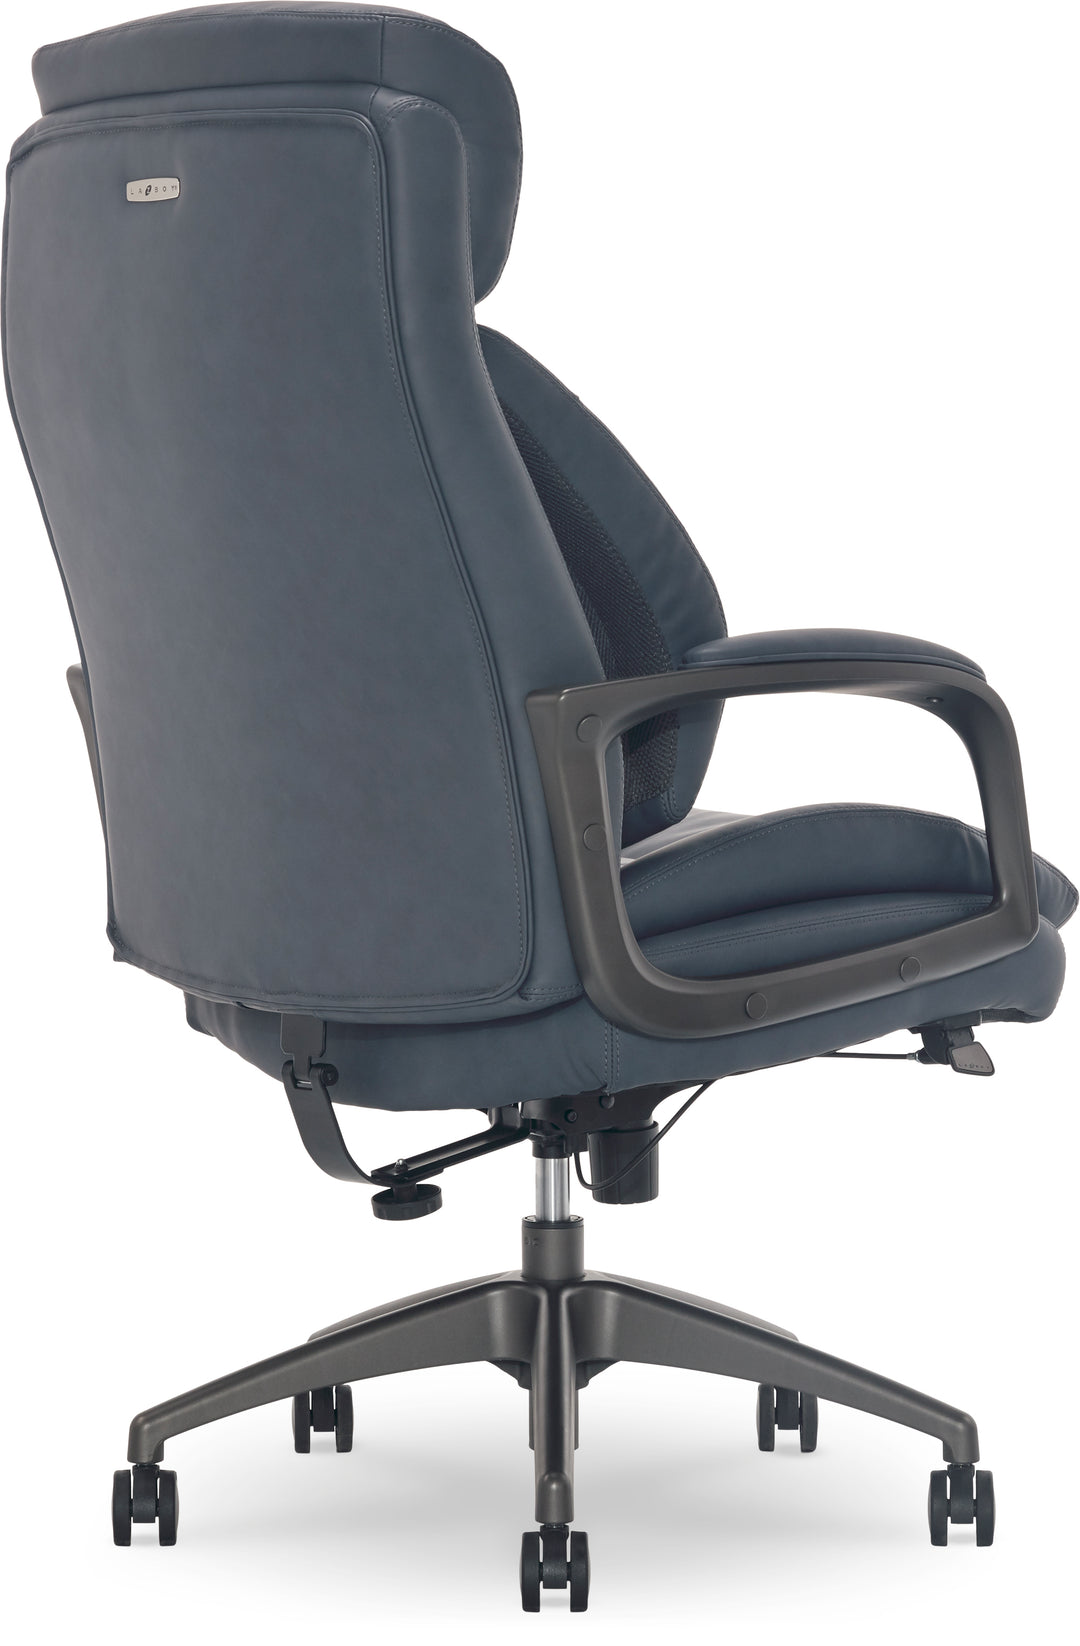 La-Z-Boy - Calix Big and Tall Executive Chair with TrueWellness Technology Office Chair - Slate_5